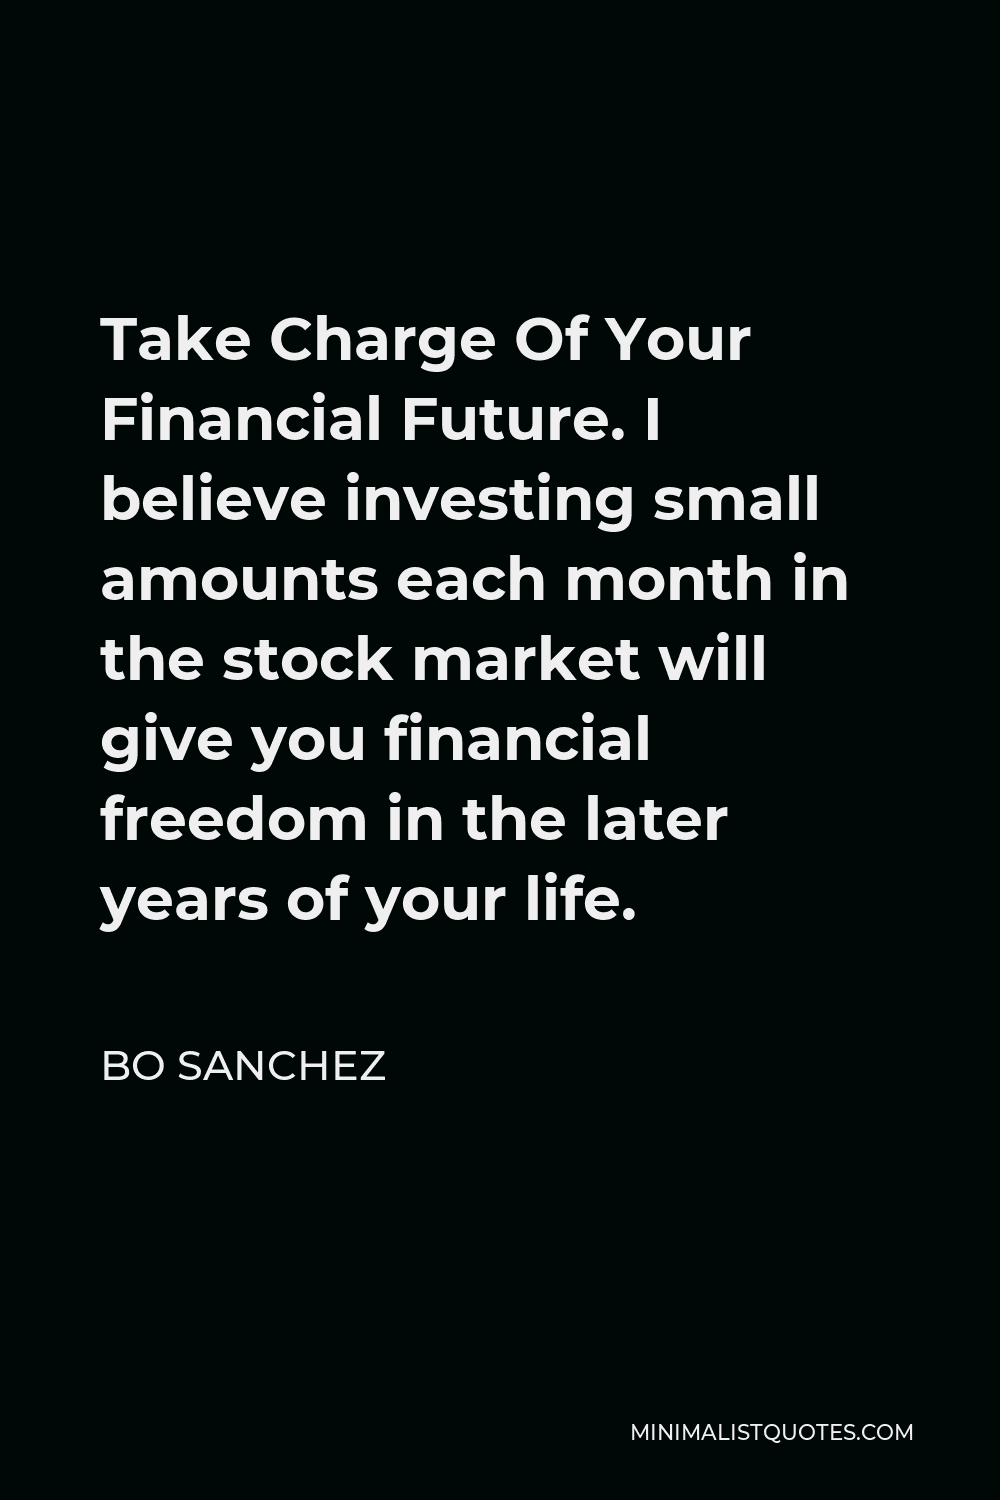 Bo Sanchez Quote - Take Charge Of Your Financial Future. I believe investing small amounts each month in the stock market will give you financial freedom in the later years of your life.